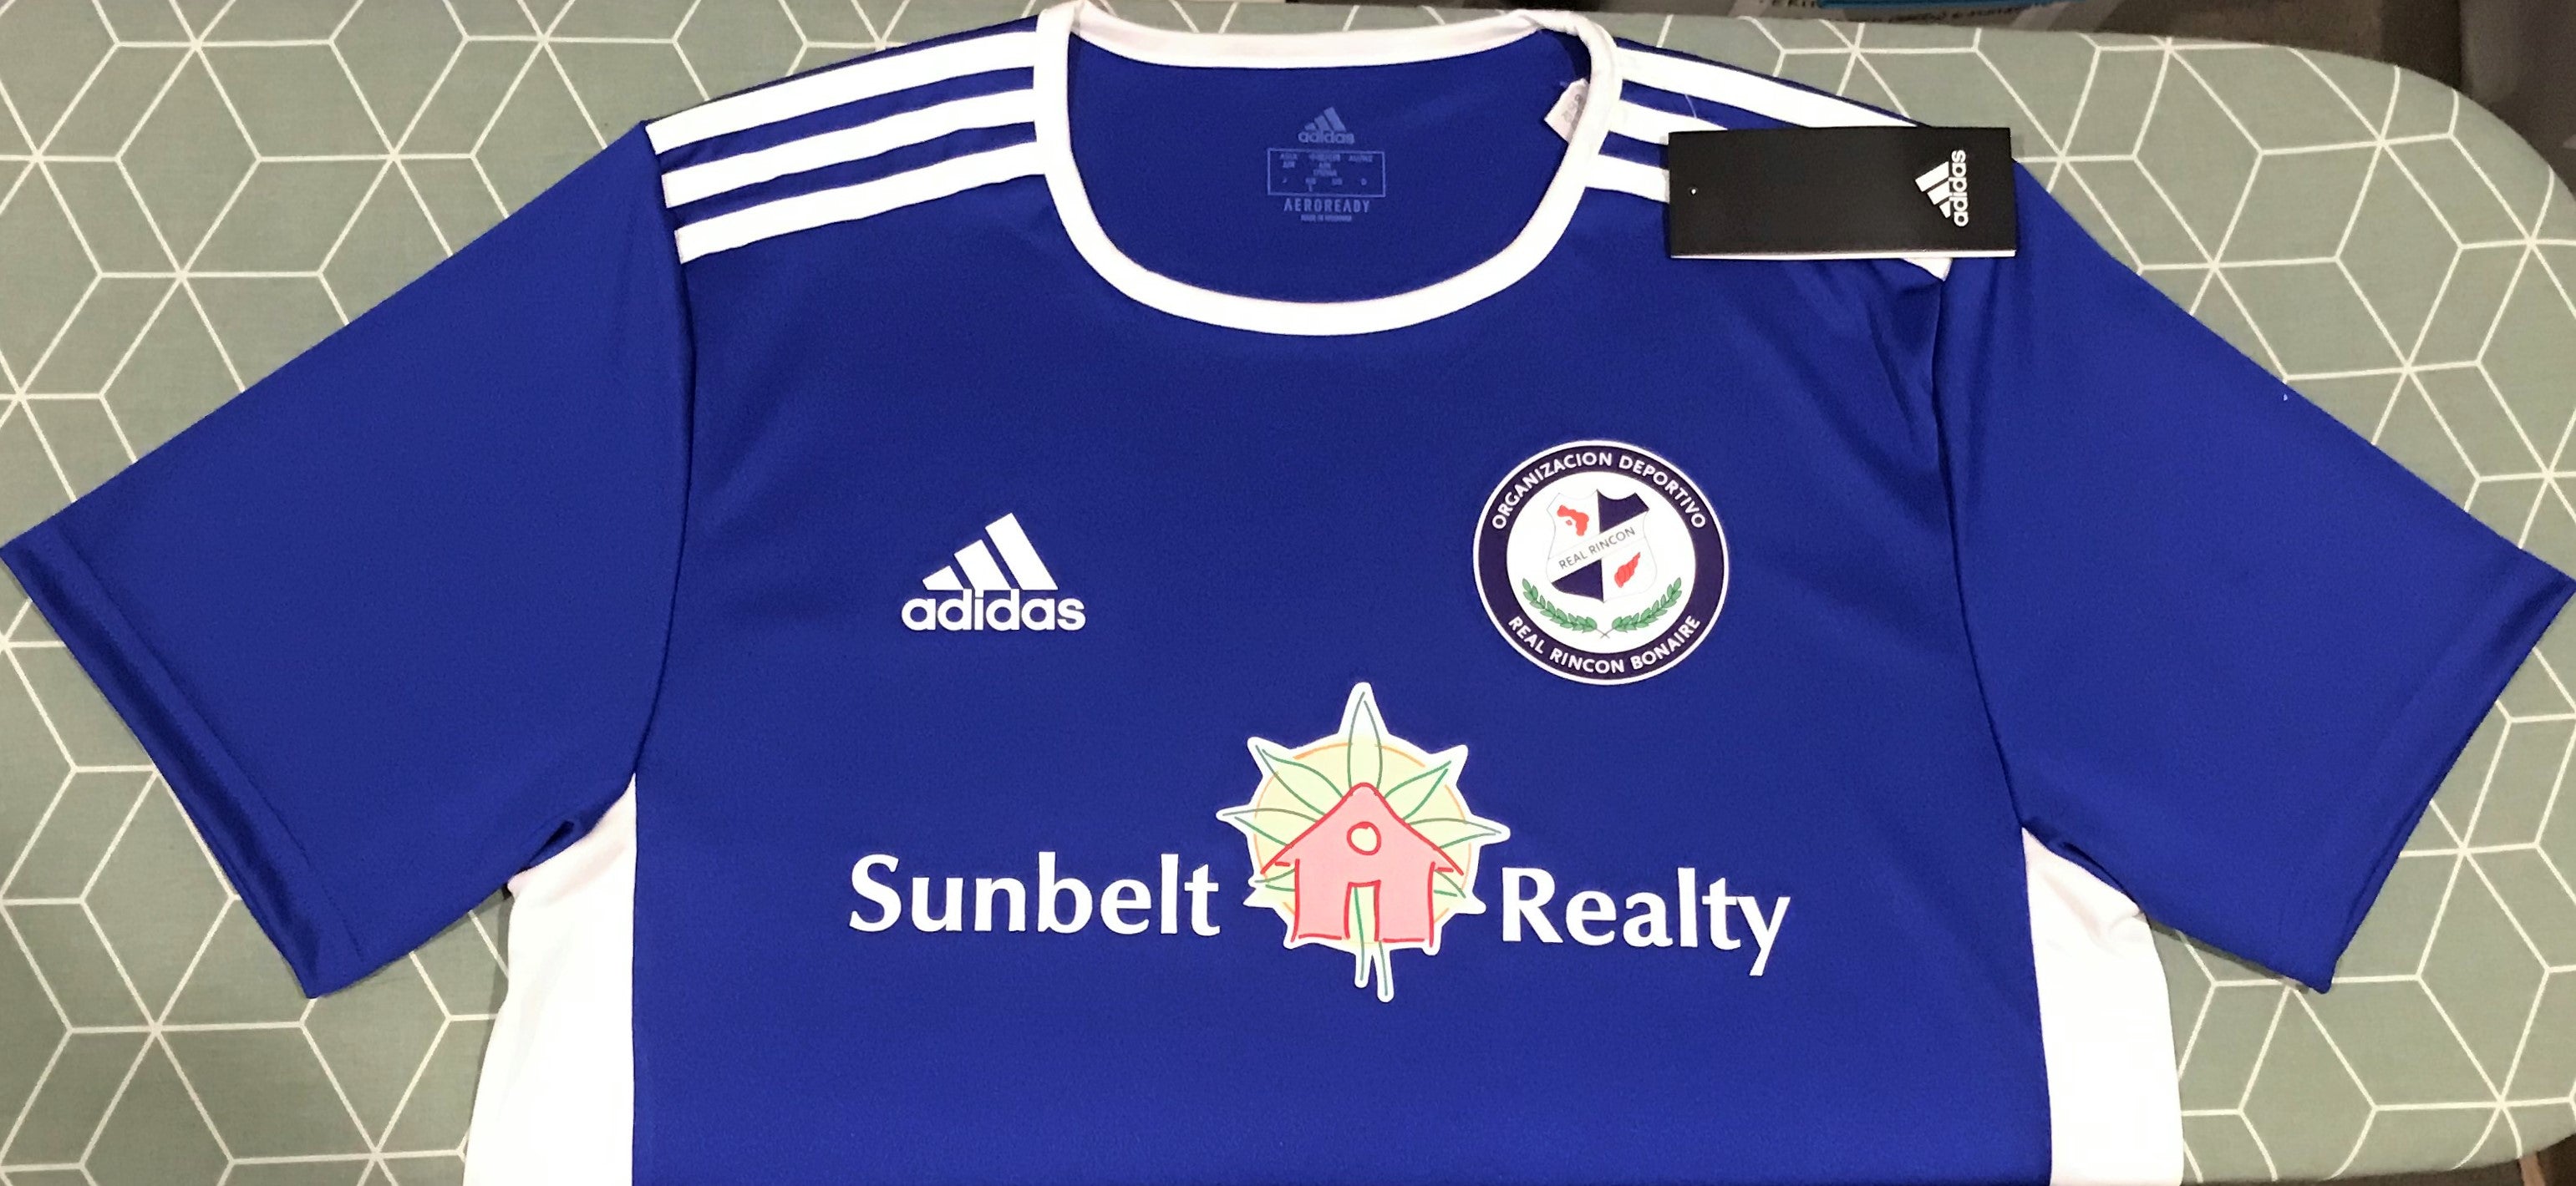 Real Rincon 2018-19 Home Jersey/Shirt